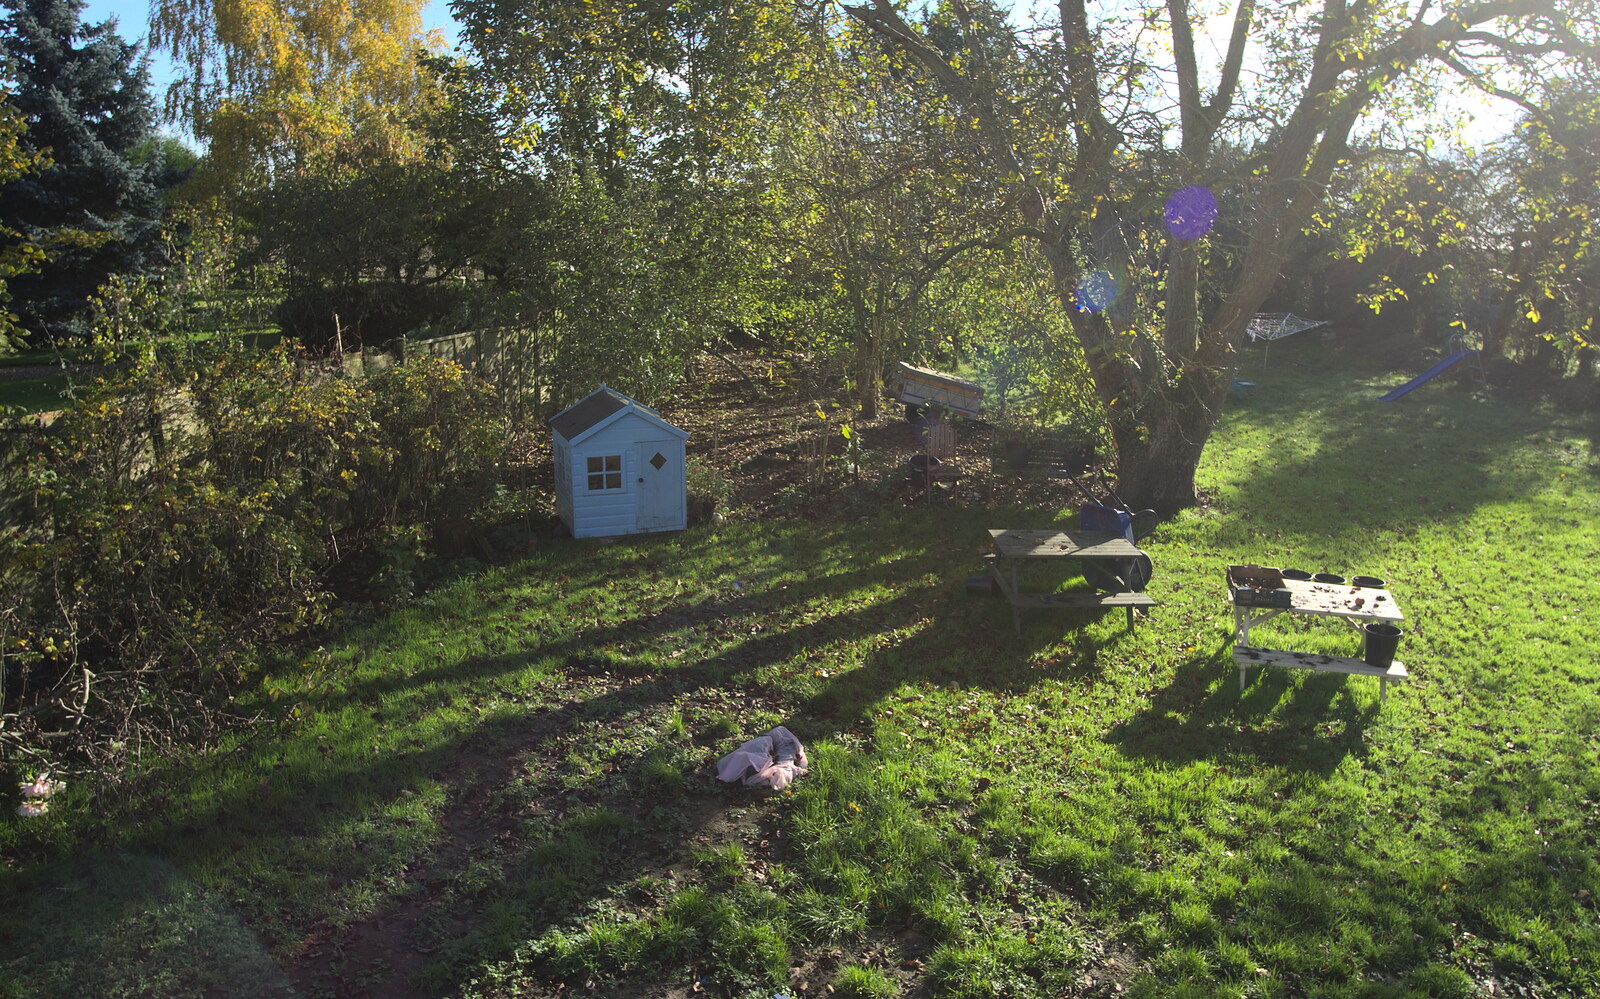 A November Miscellany and Building Progress, Thornham and Brome, Suffolk - 17th November 2013: The garden's in a mess